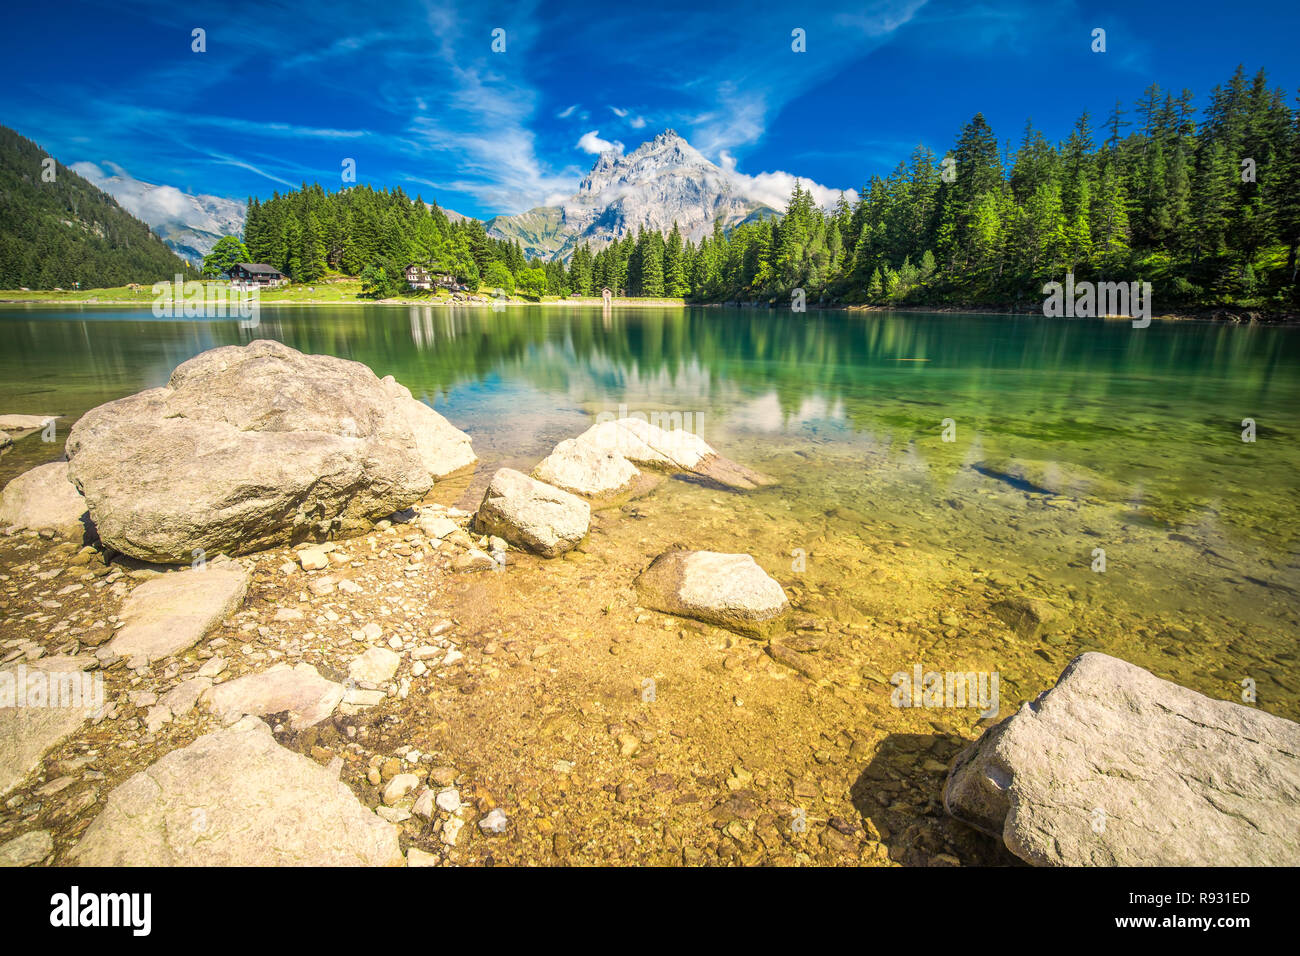 Arnisee with Swiss Alps. Arnisee is a reservoir in the Canton of Uri, Switzerland, Europe. Stock Photo